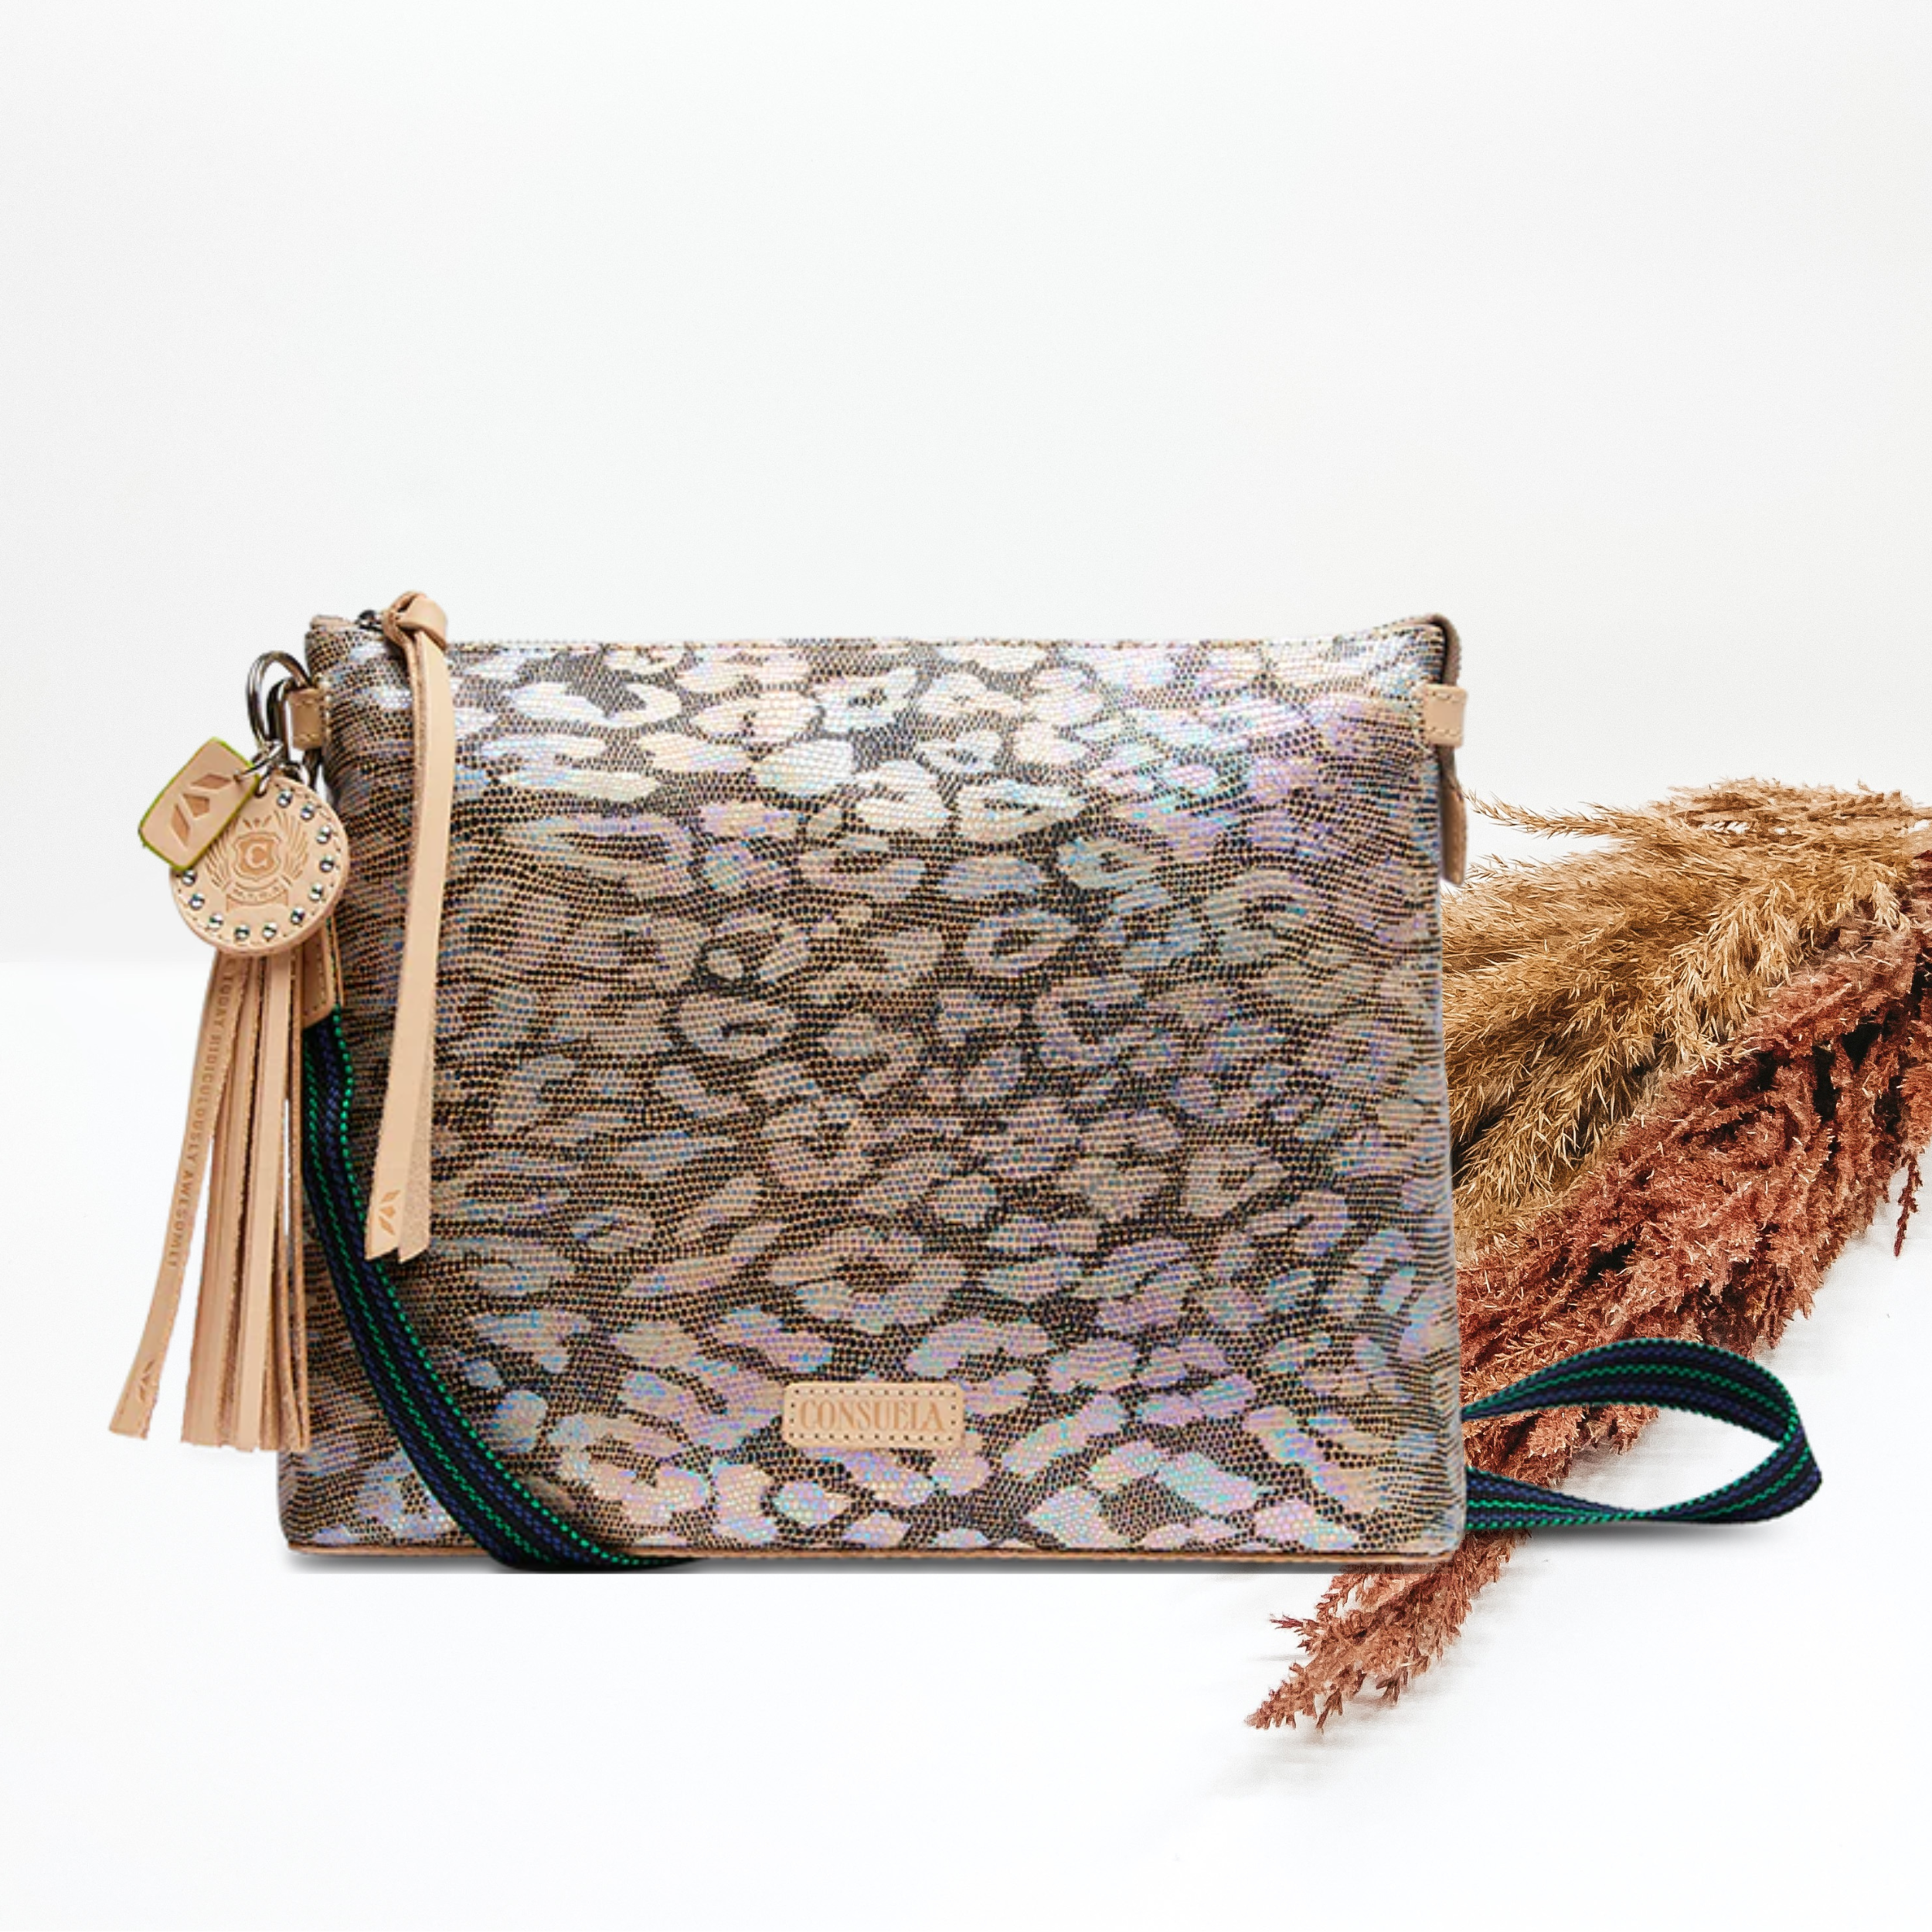 Centered in the picture is a crossbody bag in a rainbow leopard print. The background is pompas grass and solid white. 